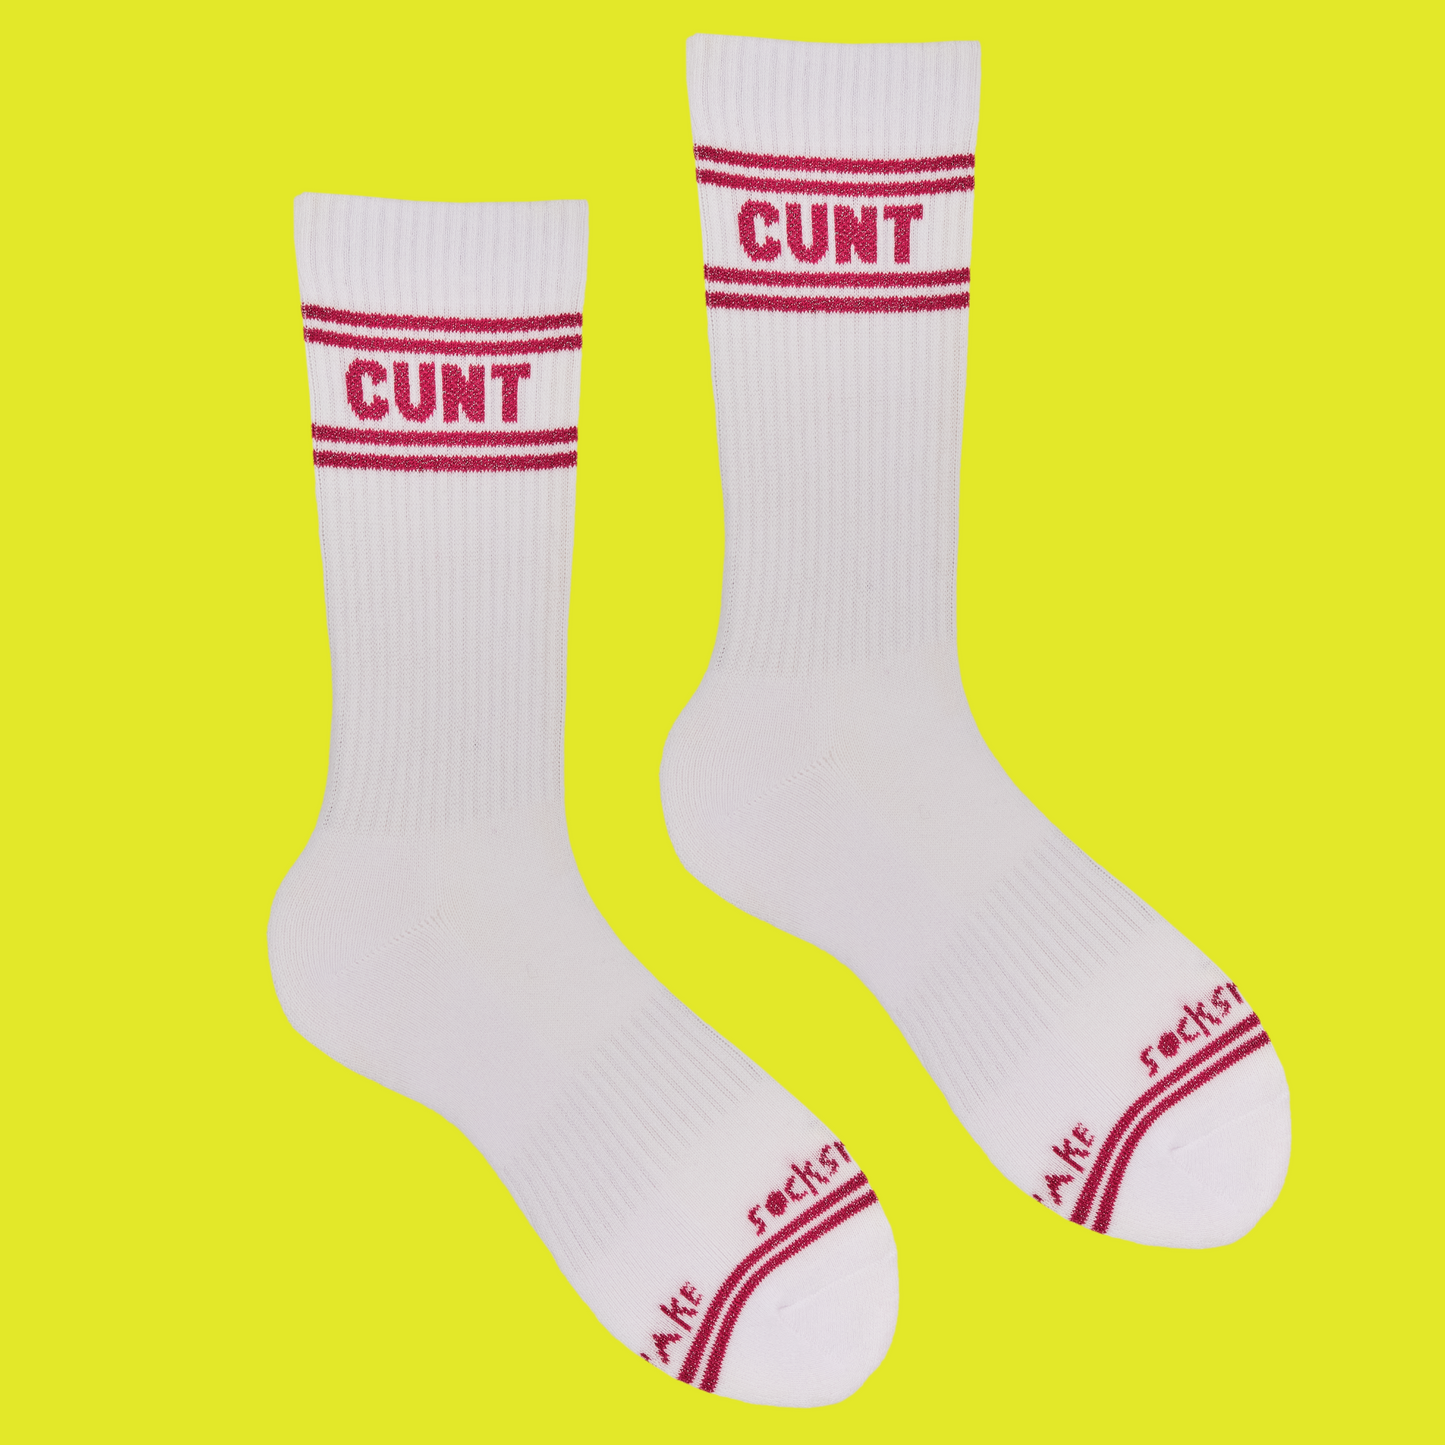 A white pair of athletic socks with red trim on the ankles and toes. A euphemism for the female genitals on the ankle.